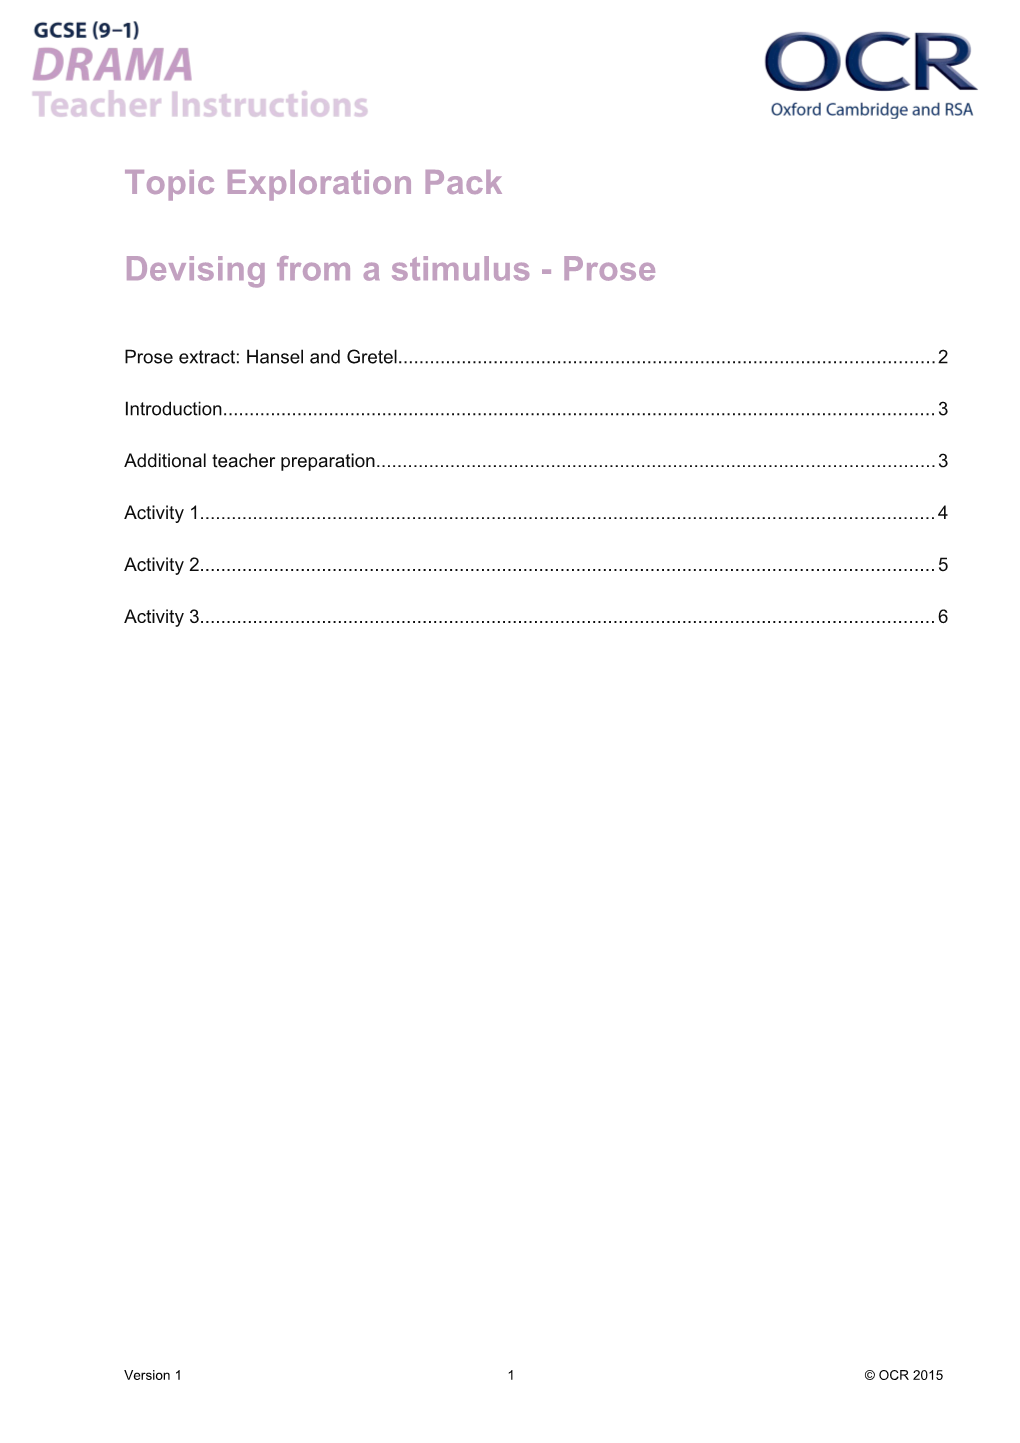 GCSE (9-1) Drama - Devising from a Stimulus - Prose Topic Exploration Pack